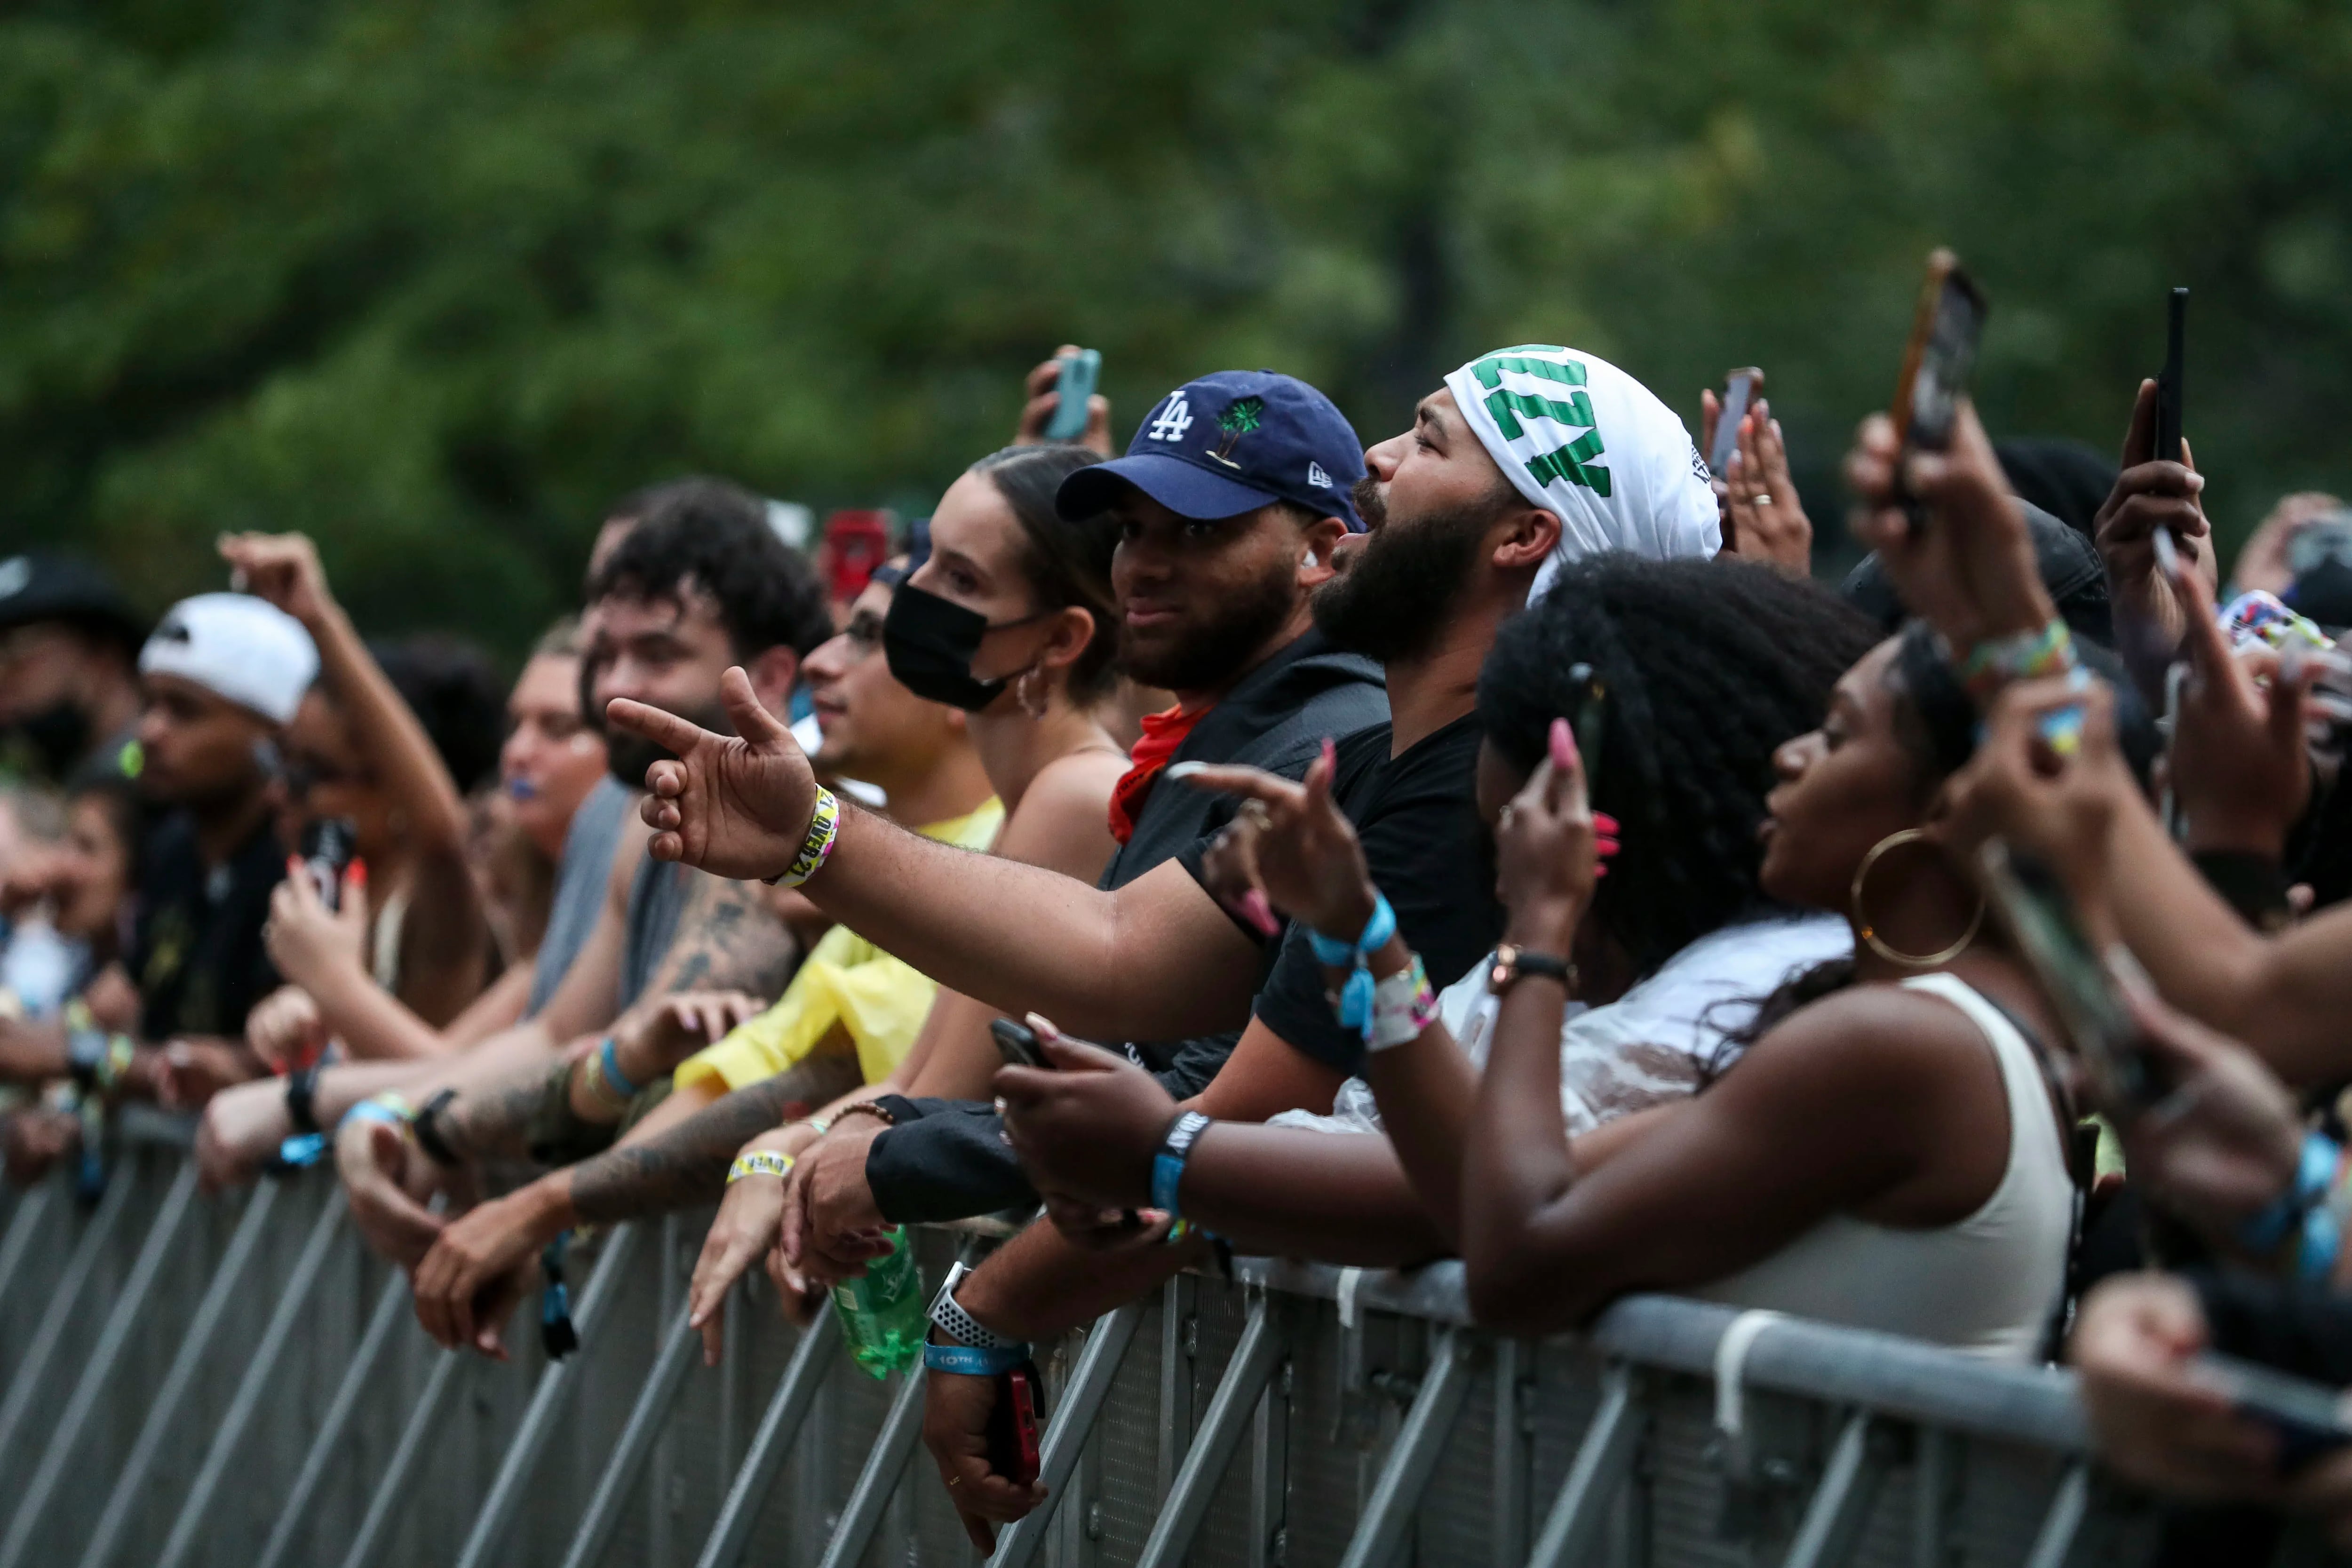 Attendees listen to Lloyd Banks at Made in America in Philadelphia in 2021. The 2023 Made in America festival will be headlined by pop and R&B stars Lizzo and SZA, Sept. 2-3.